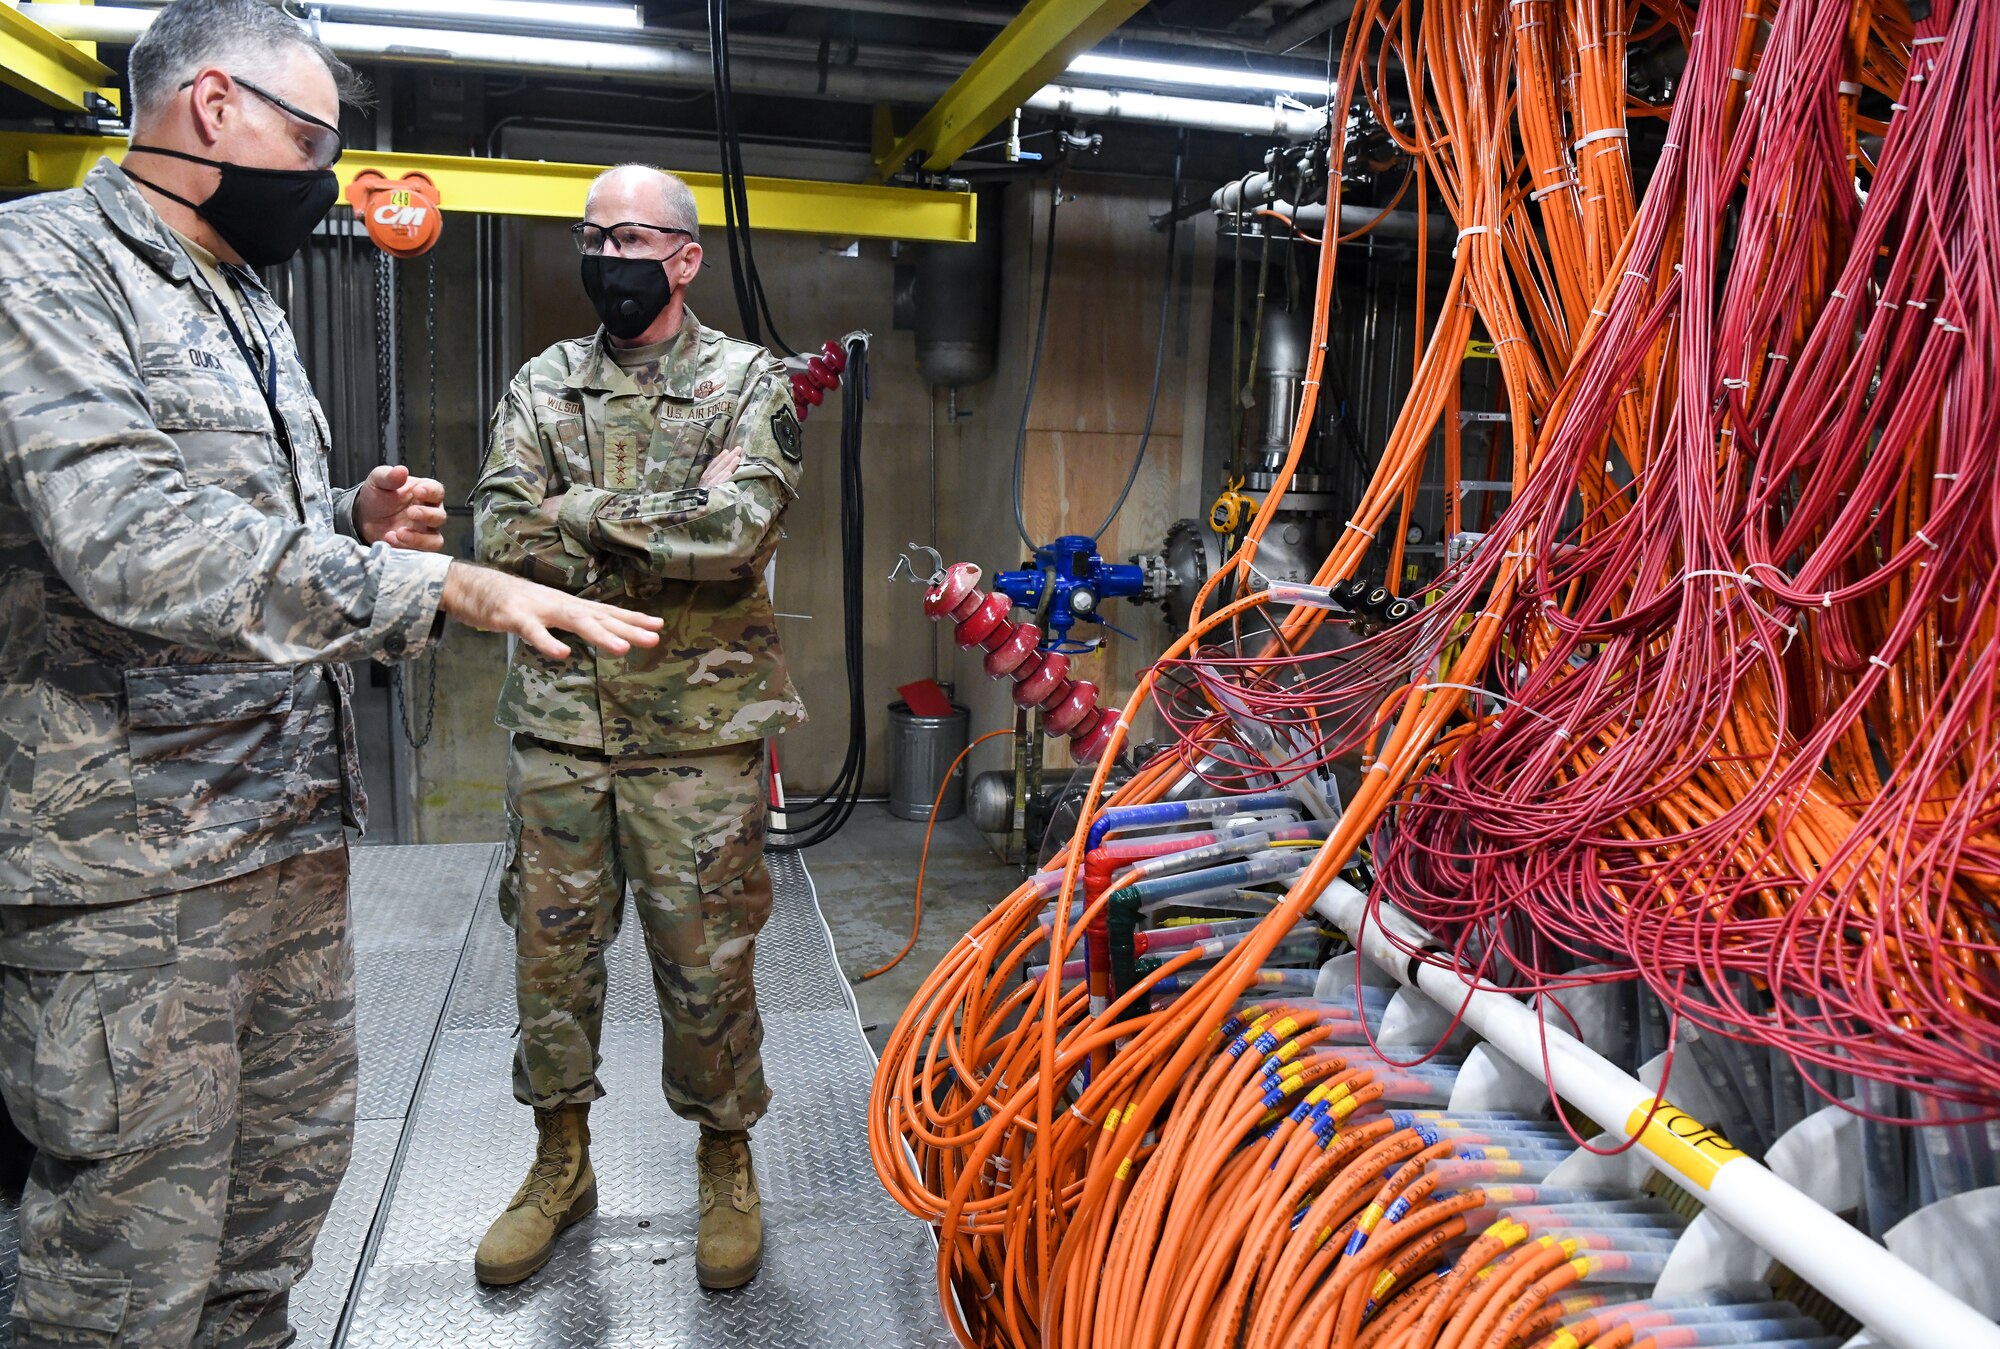 Lt. Col. Adam Quick, left, director of the Arnold Engineering Development Complex (AEDC) Space and Missile Branch, briefs Vice Chief of Staff of the Air Force Gen. Stephen Wilson as they walk through part of the arc heater facility Aug. 11, 2020, at Arnold Air Force Base, Tenn. Arc heaters allow for the testing of thermal protection systems in simulated environments representative of hypersonic flight. (U.S. Air Force photo by Jill Pickett)